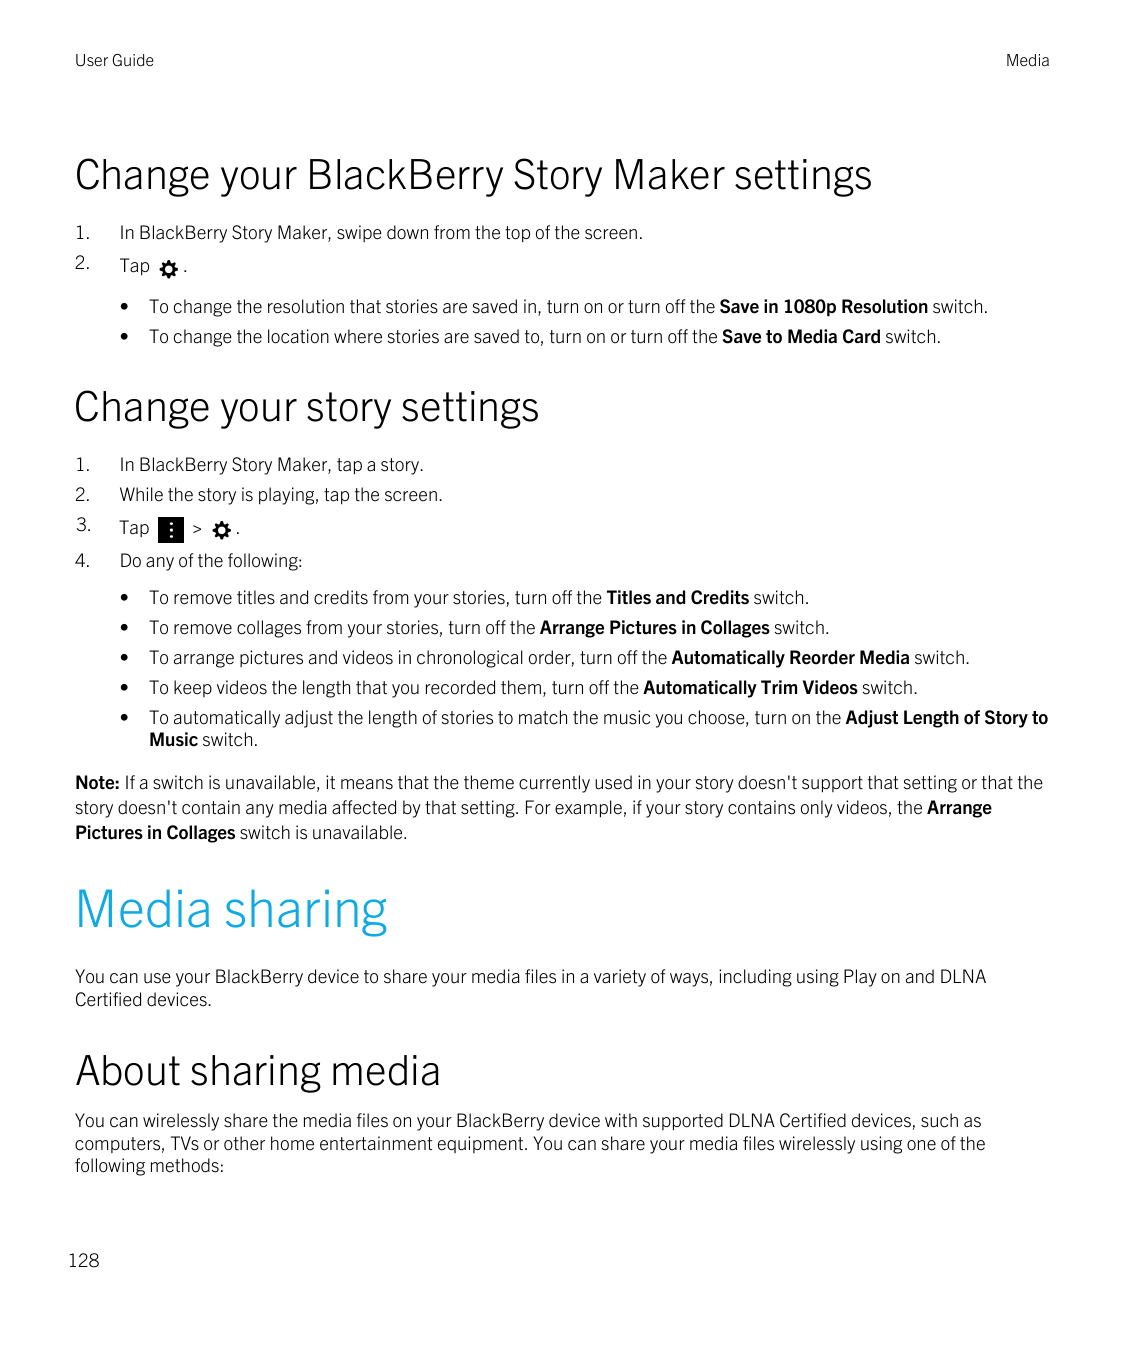 User GuideMediaChange your BlackBerry Story Maker settings1.In BlackBerry Story Maker, swipe down from the top of the screen.2.T